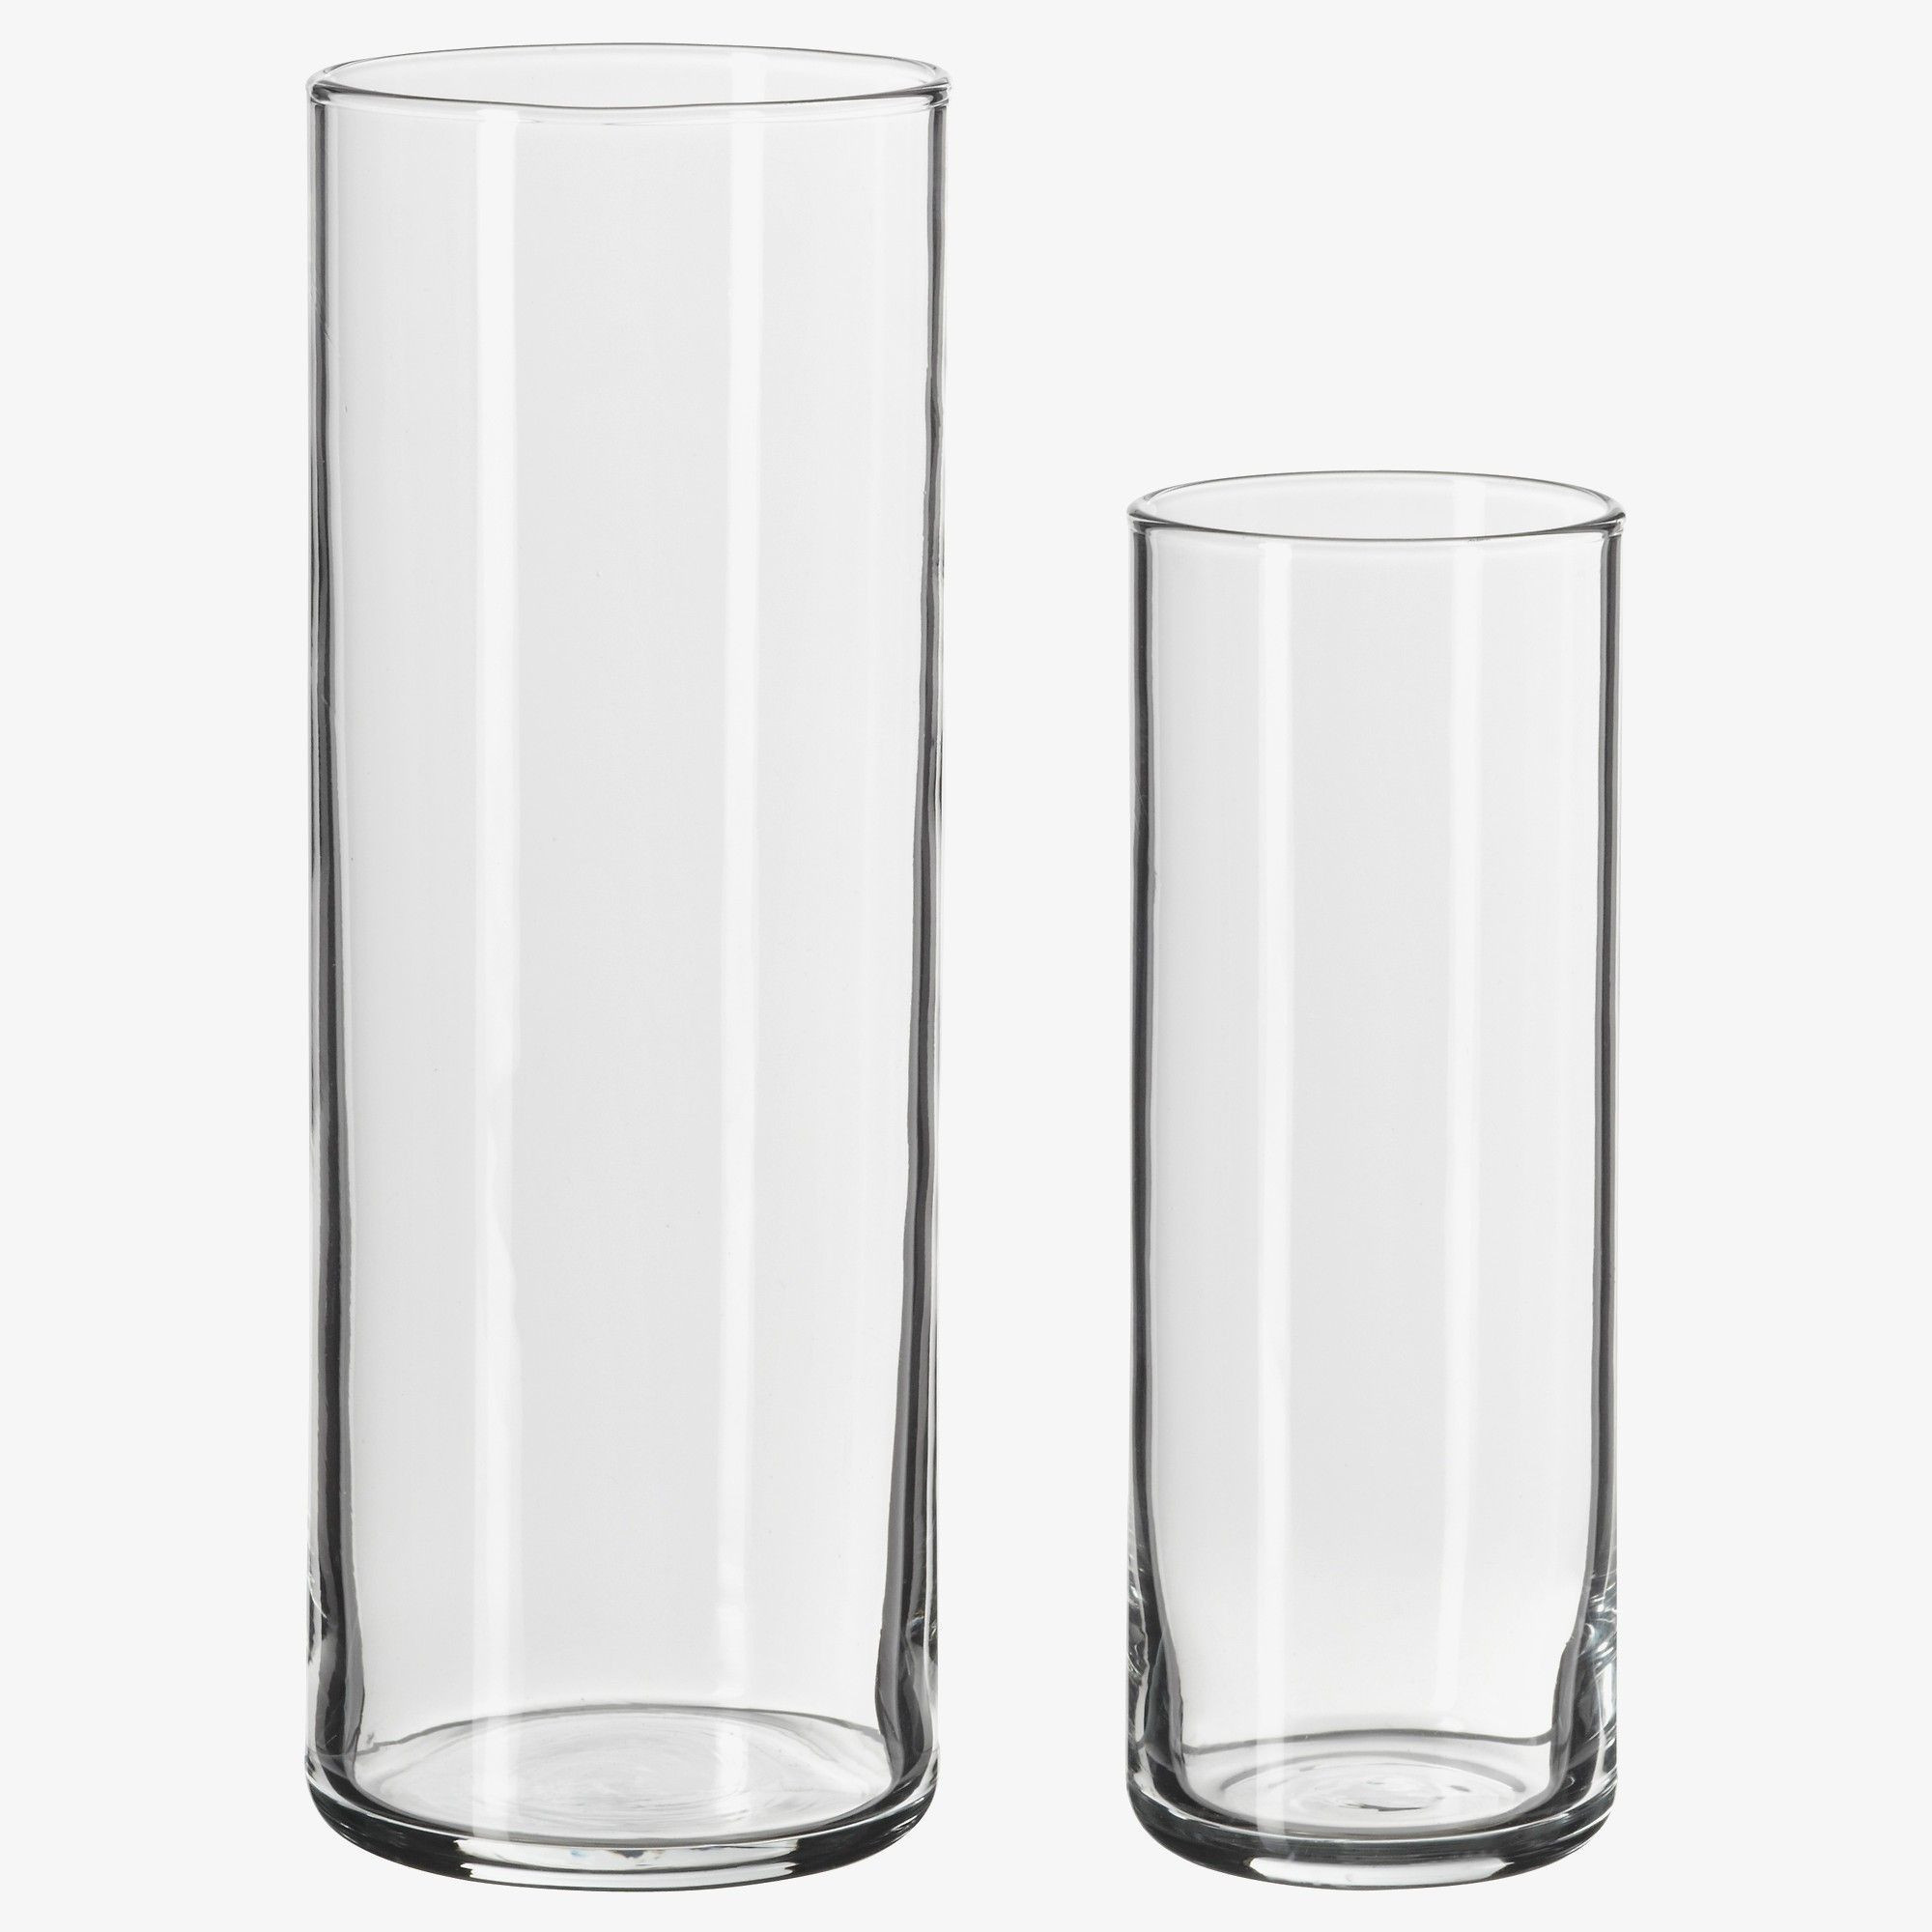 15 Elegant Clear Round Glass Vases wholesale 2024 free download clear round glass vases wholesale of 50 glass pedestal vase the weekly world within clear glass tv stand charming new design ikea mantel great pe s5h